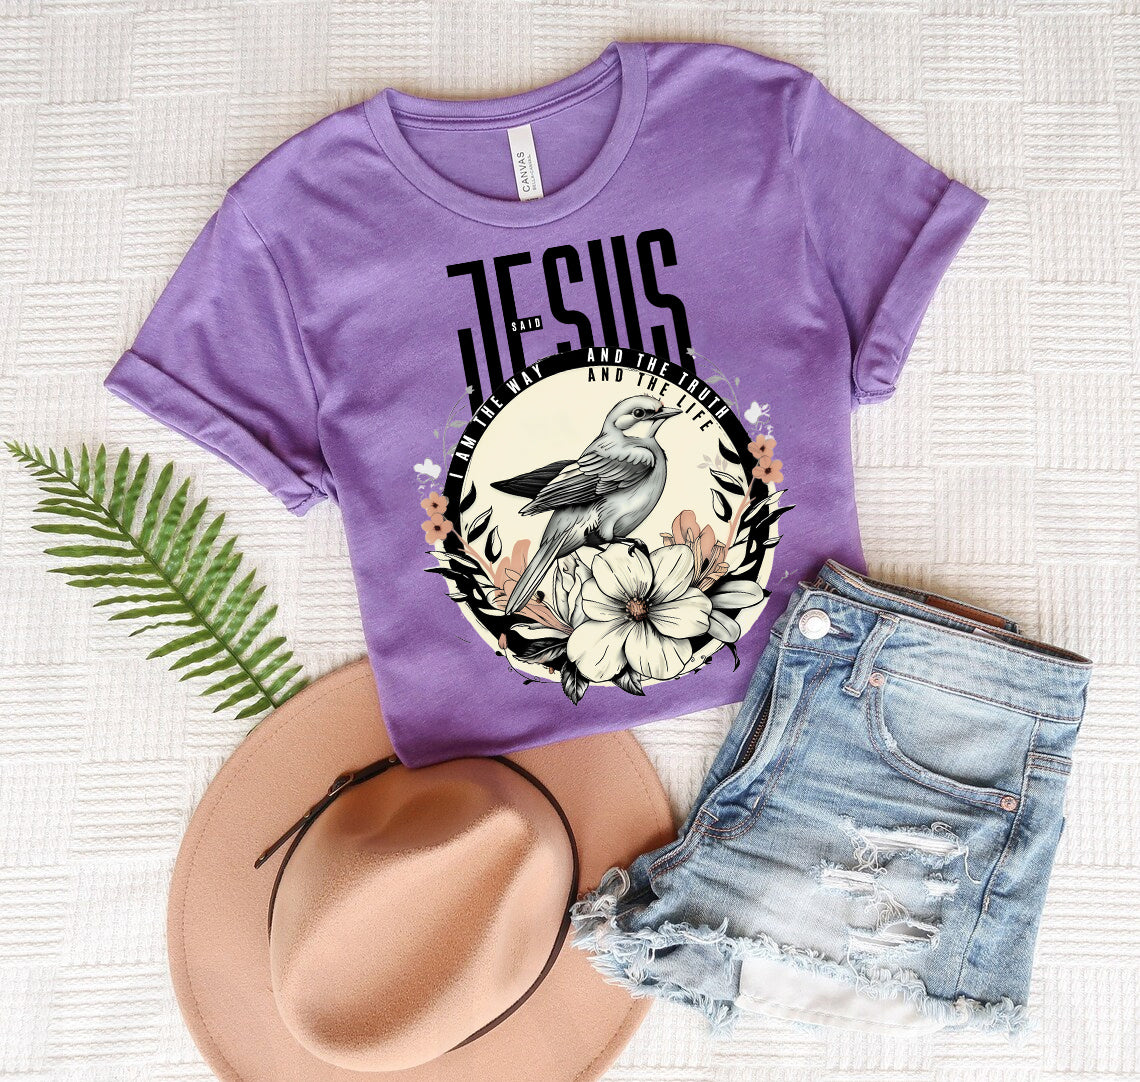 Jesus Said I am the Way the Truth and the Life Graphic Tee